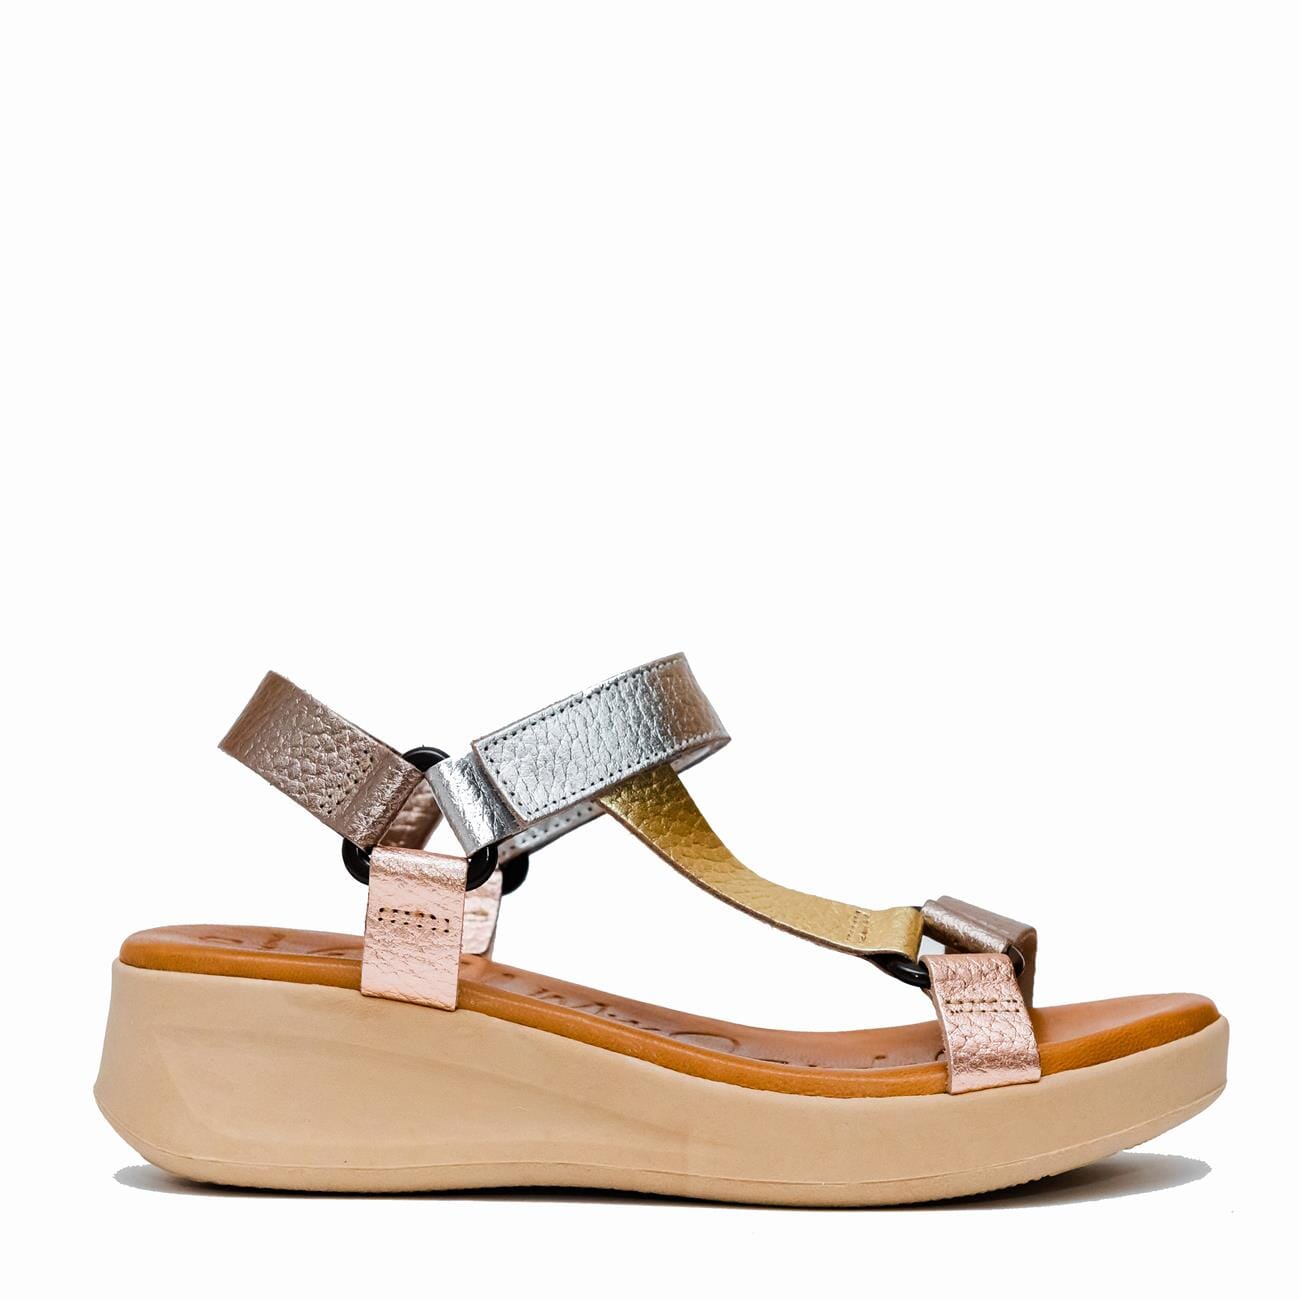 5186 Spanish leather Sport delux sandals/wedge with velcro in Metallic colour sandals Sam Star Shoes Metallic 36/3 